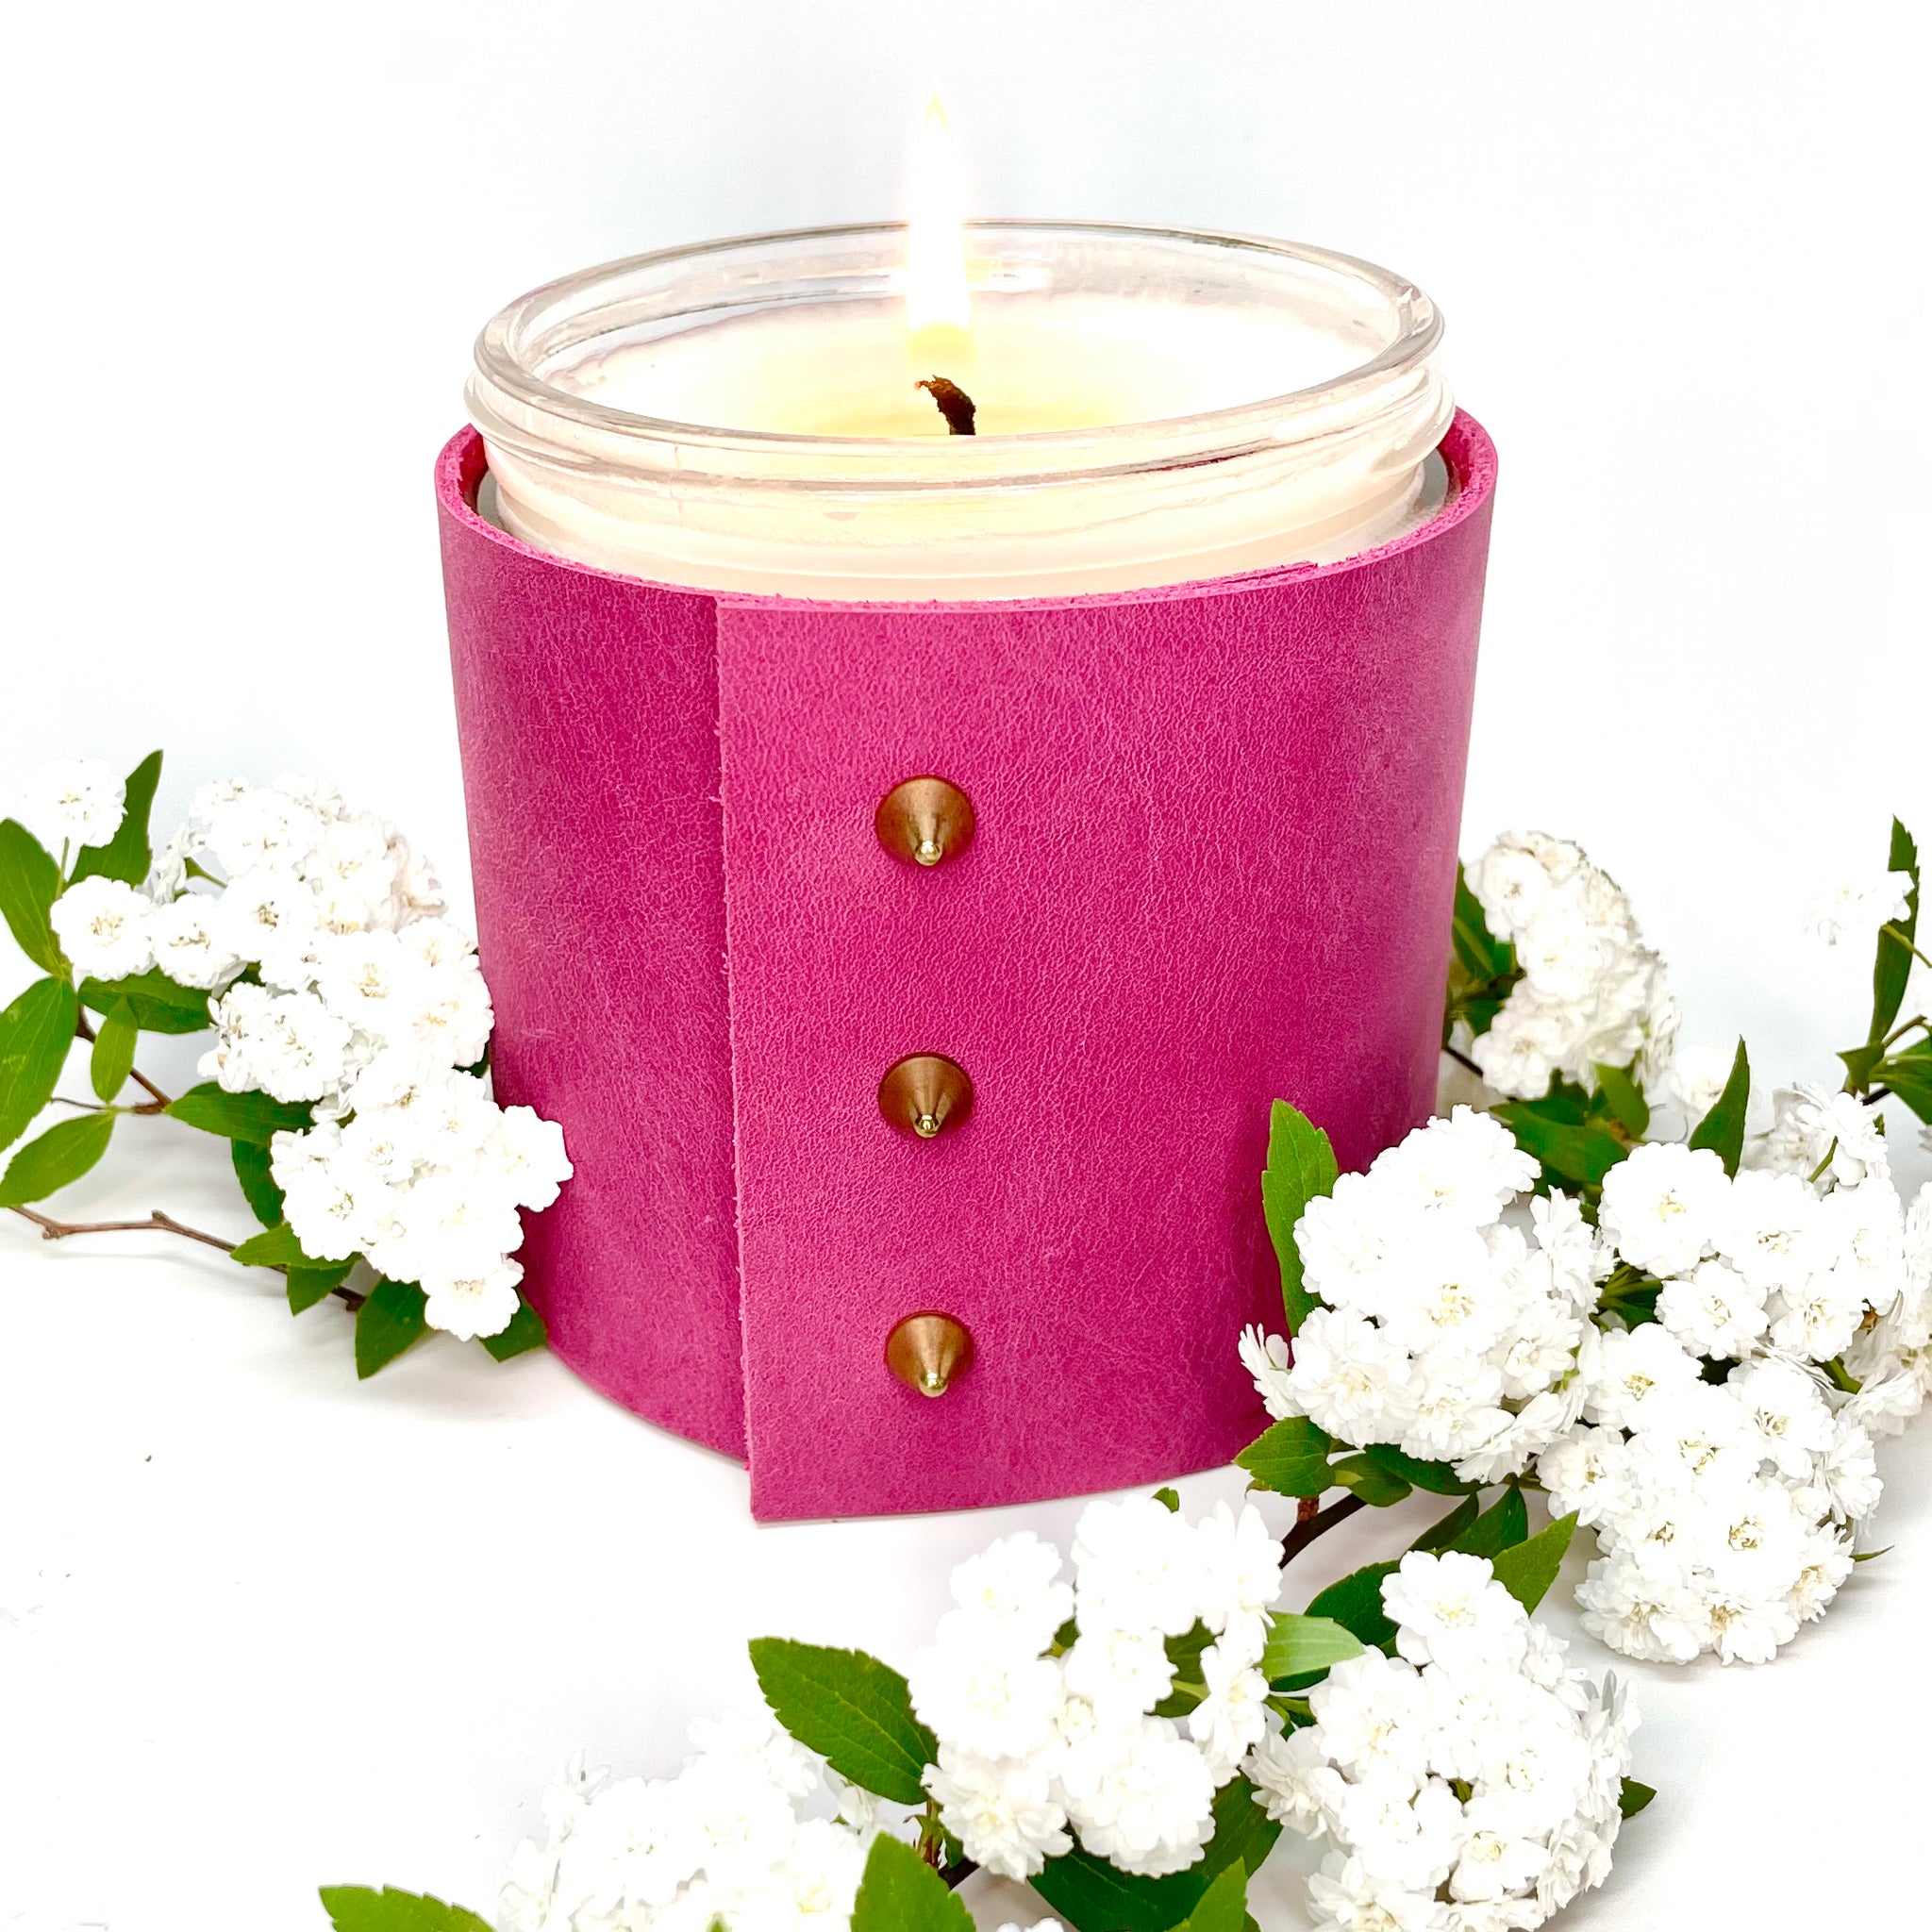 Scented all natural soy candle wrapped in a bright pink leather sleeve with three gold cone shaped studs